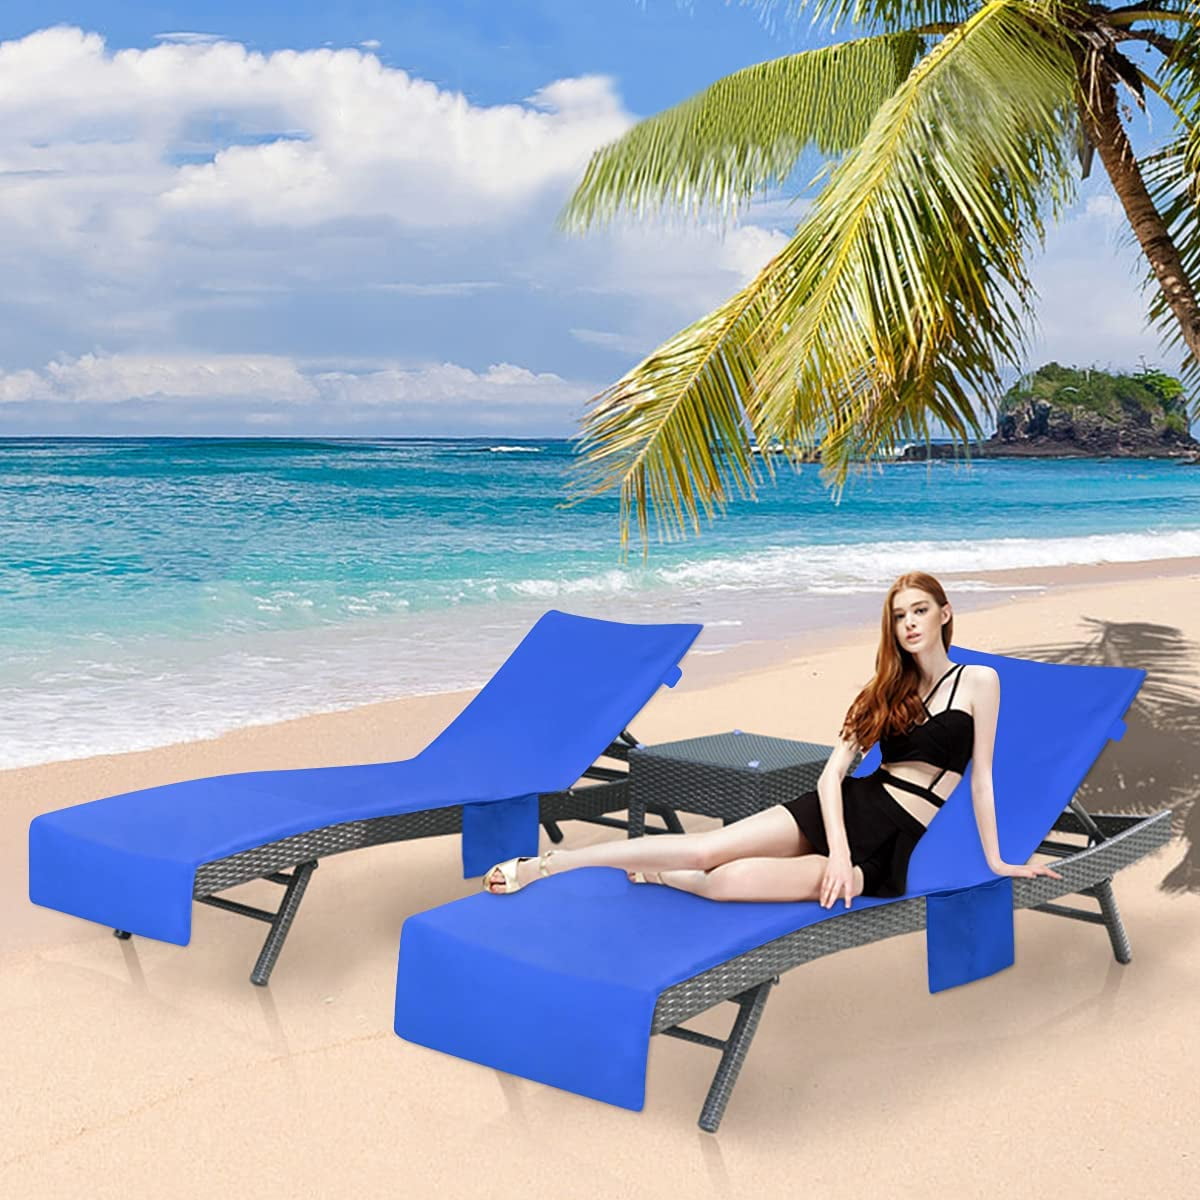 Oversized Microfiber Blue Beach Chair Towel with Side Pockets Chaise Lounge Chair Towel Cover for Sun Lounger Pool Sunbathing Garden Beach Hotel Tie-Dye Blue 85 L x 30 W 